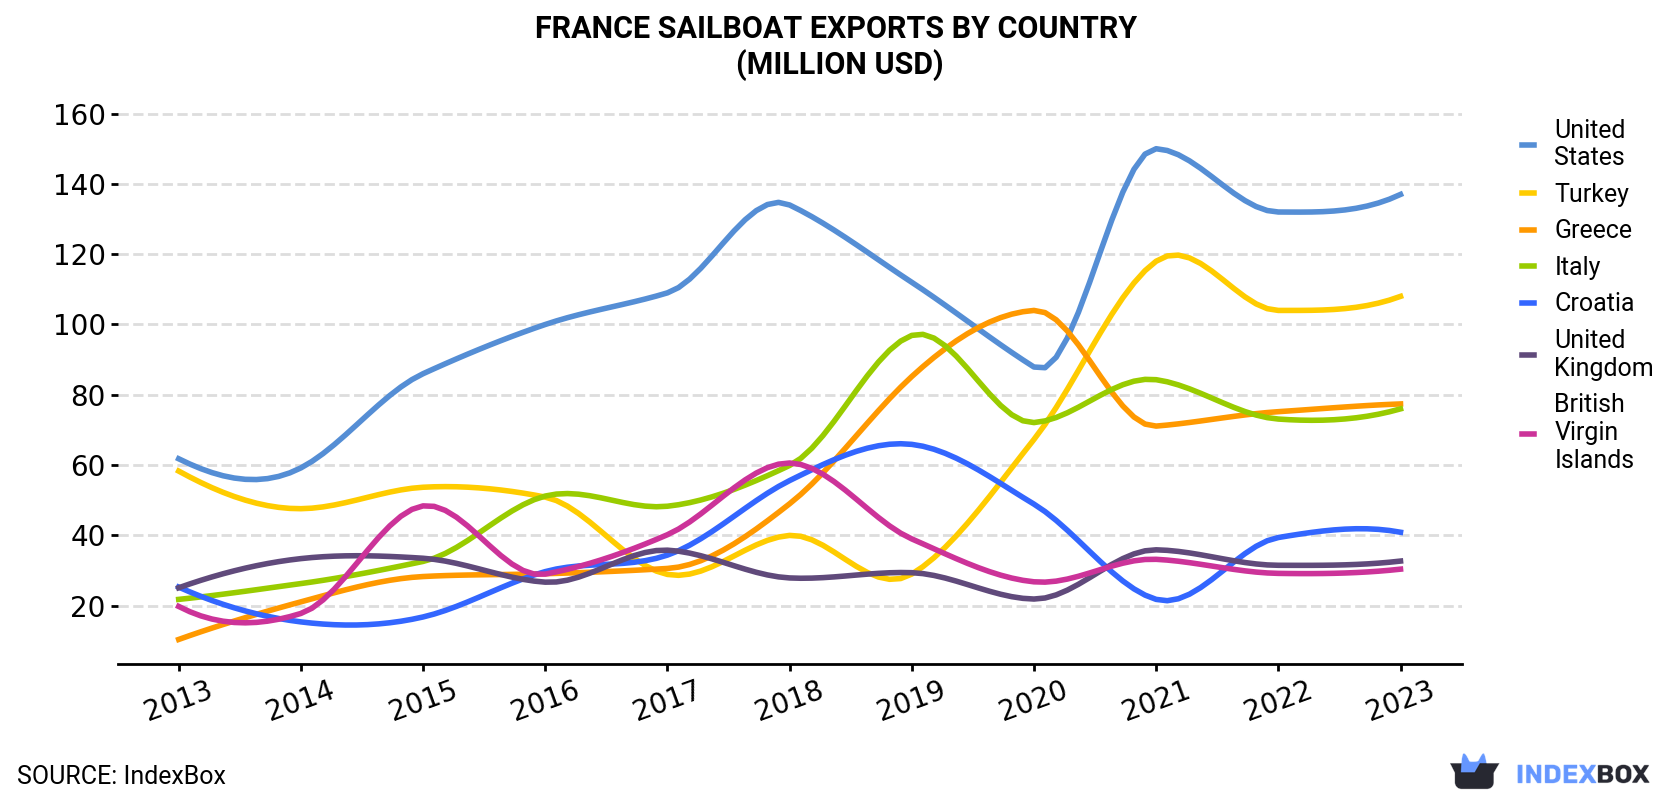 France Sailboat Exports By Country (Million USD)